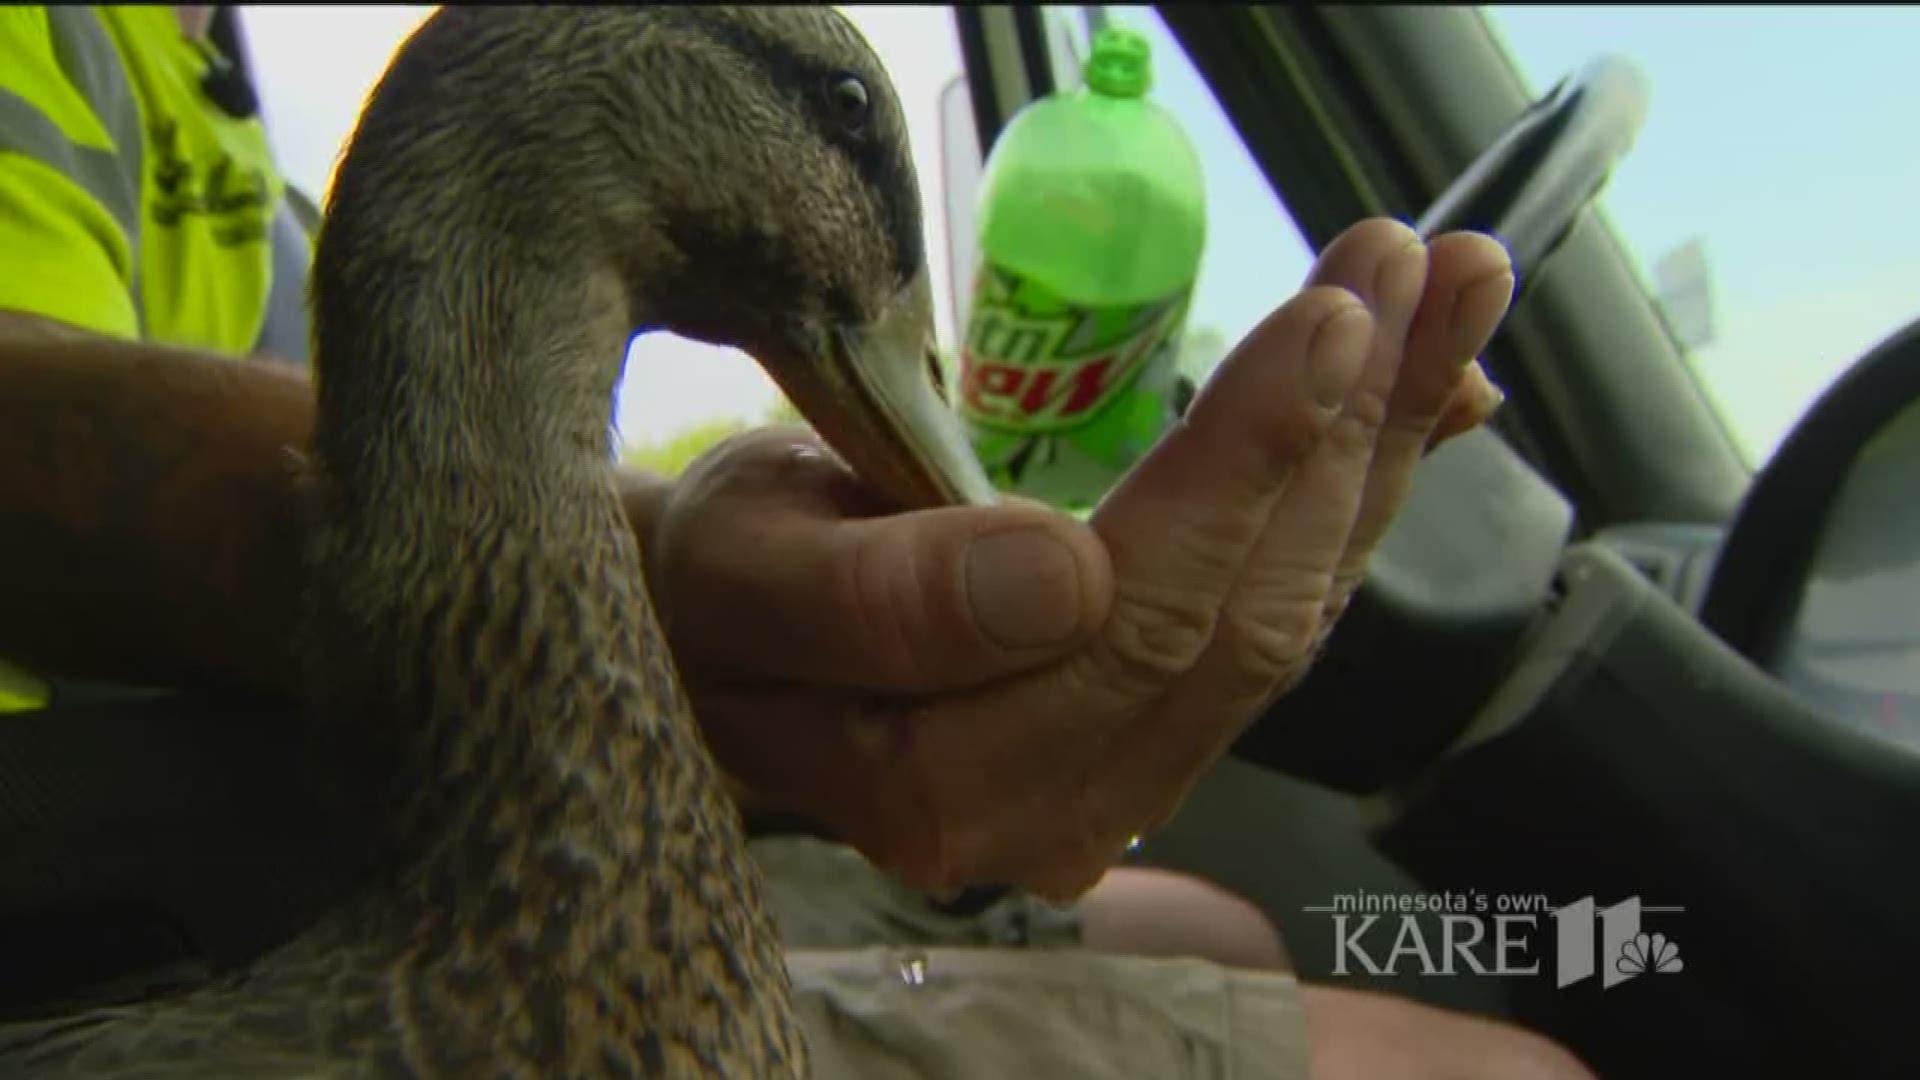 During nine years together delivering freight around the Twin Cities, Joe and his duck Frank racked up more than 750,000 miles in their flatbed truck. Now, Joe welcomes Eddy. http://kare11.tv/2ugywOM